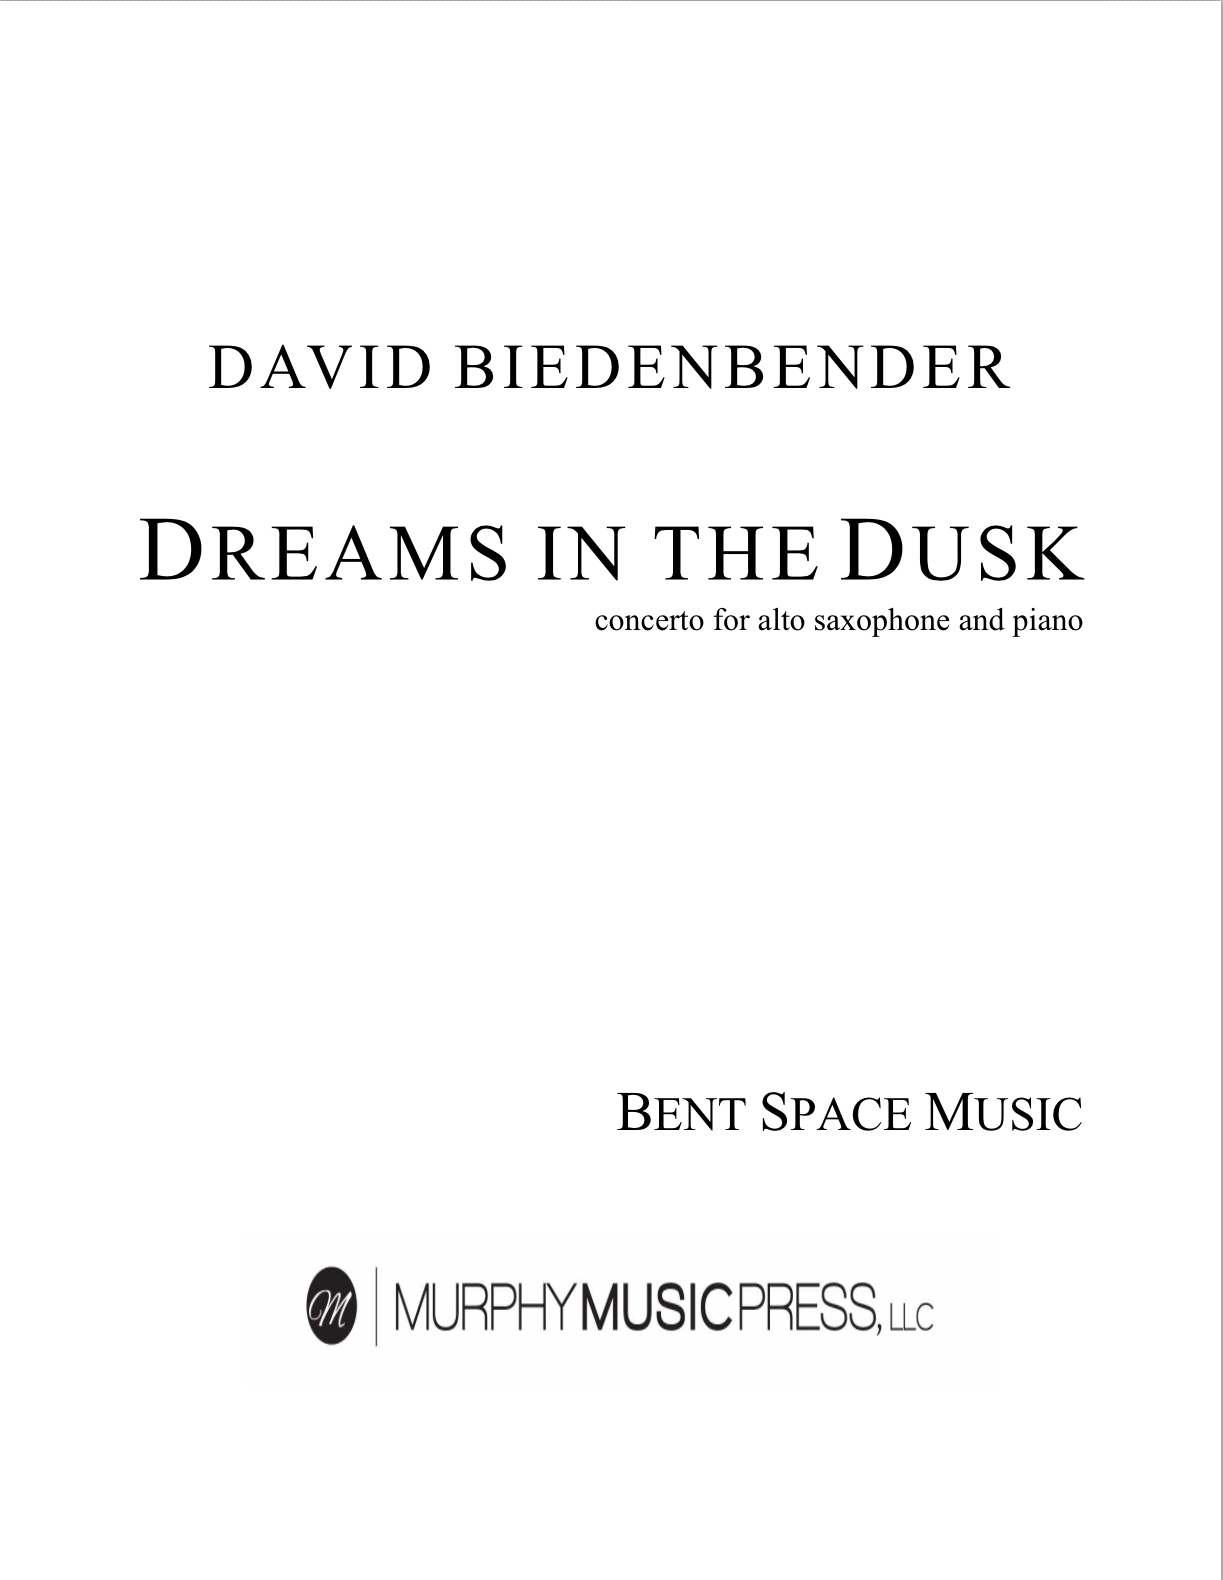 Dreams In The Dusk - Piano Reduction by David Biedenbender